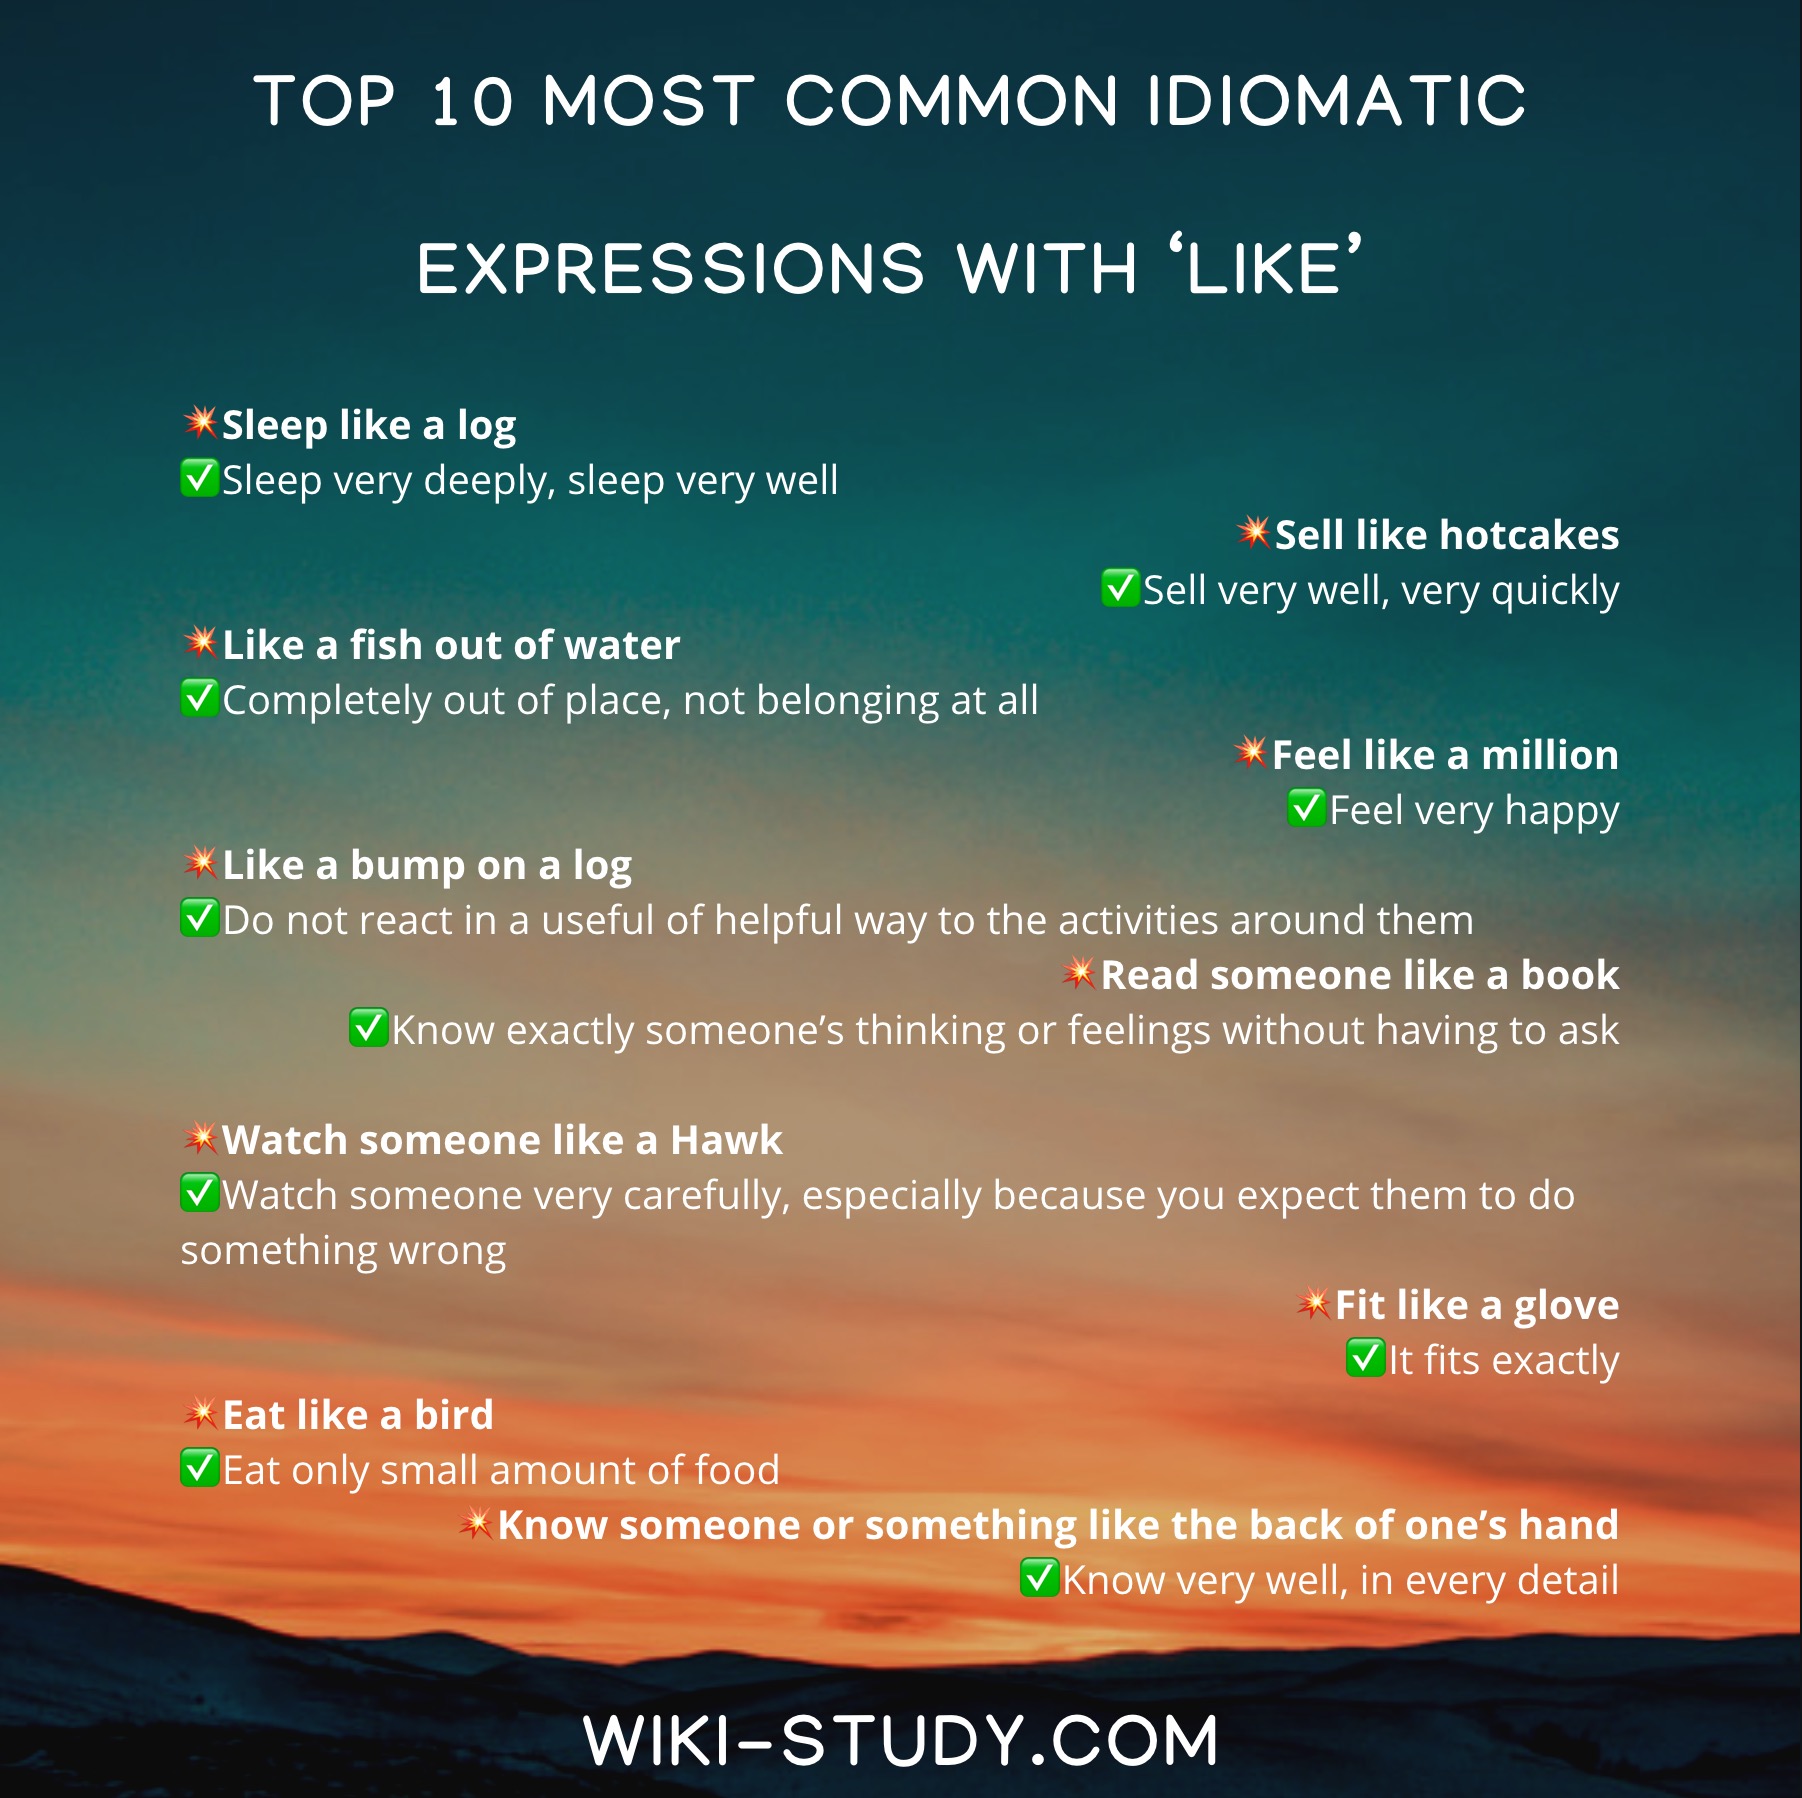 Top 10 Most Common Idiomatic Expressions with ‘Like’